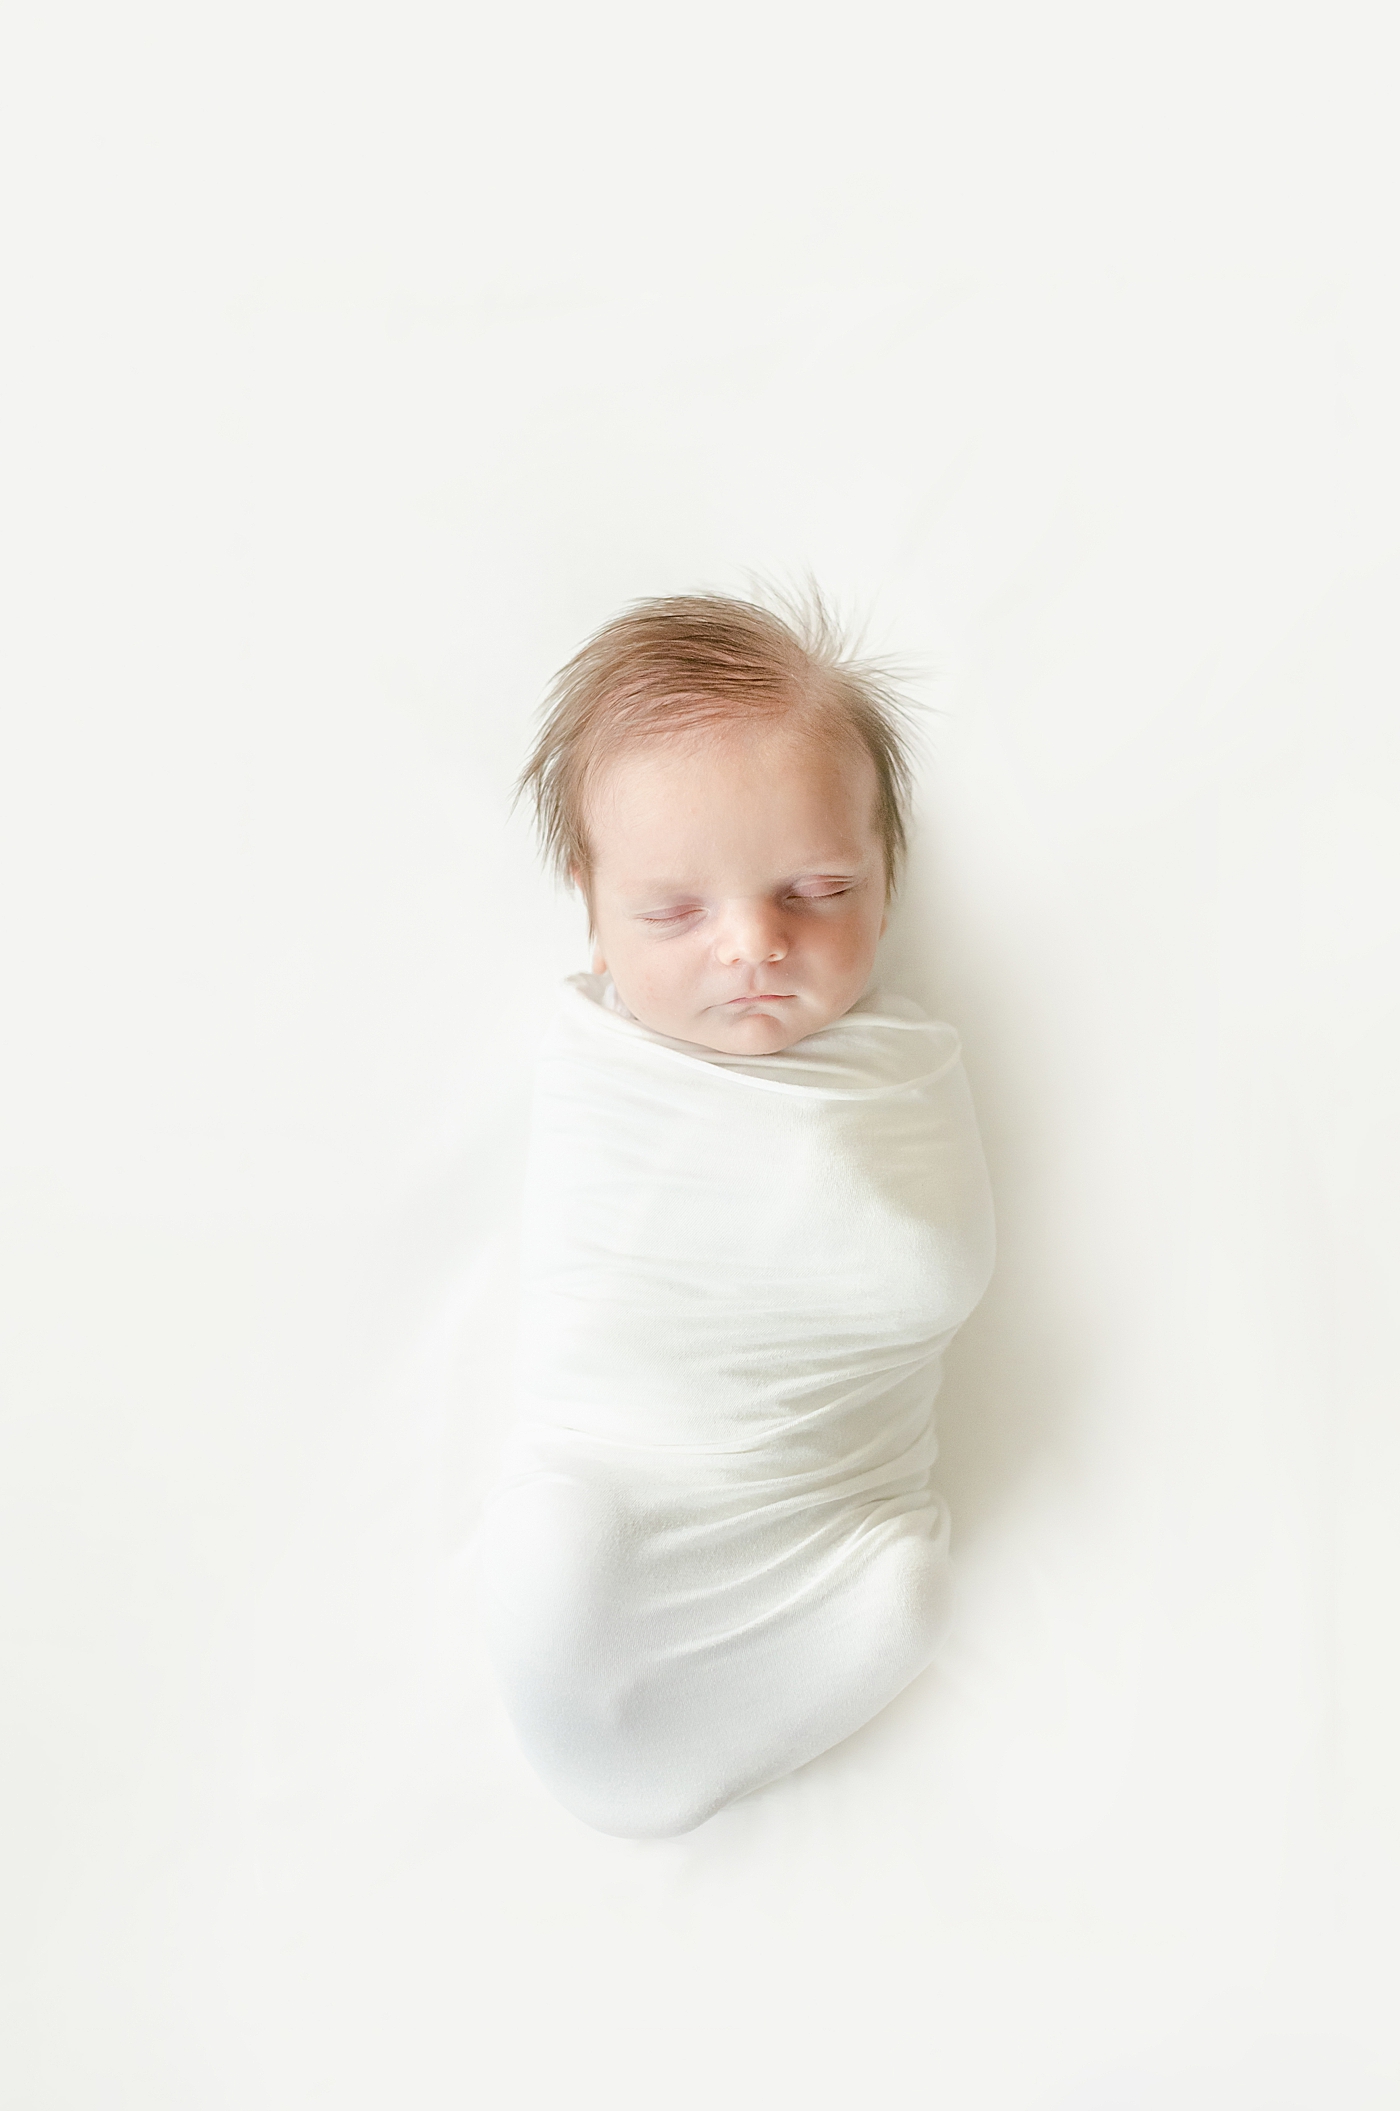 Sleeping newborn baby wrapped in a white swaddle | Image by Chrissy Winchester Photography